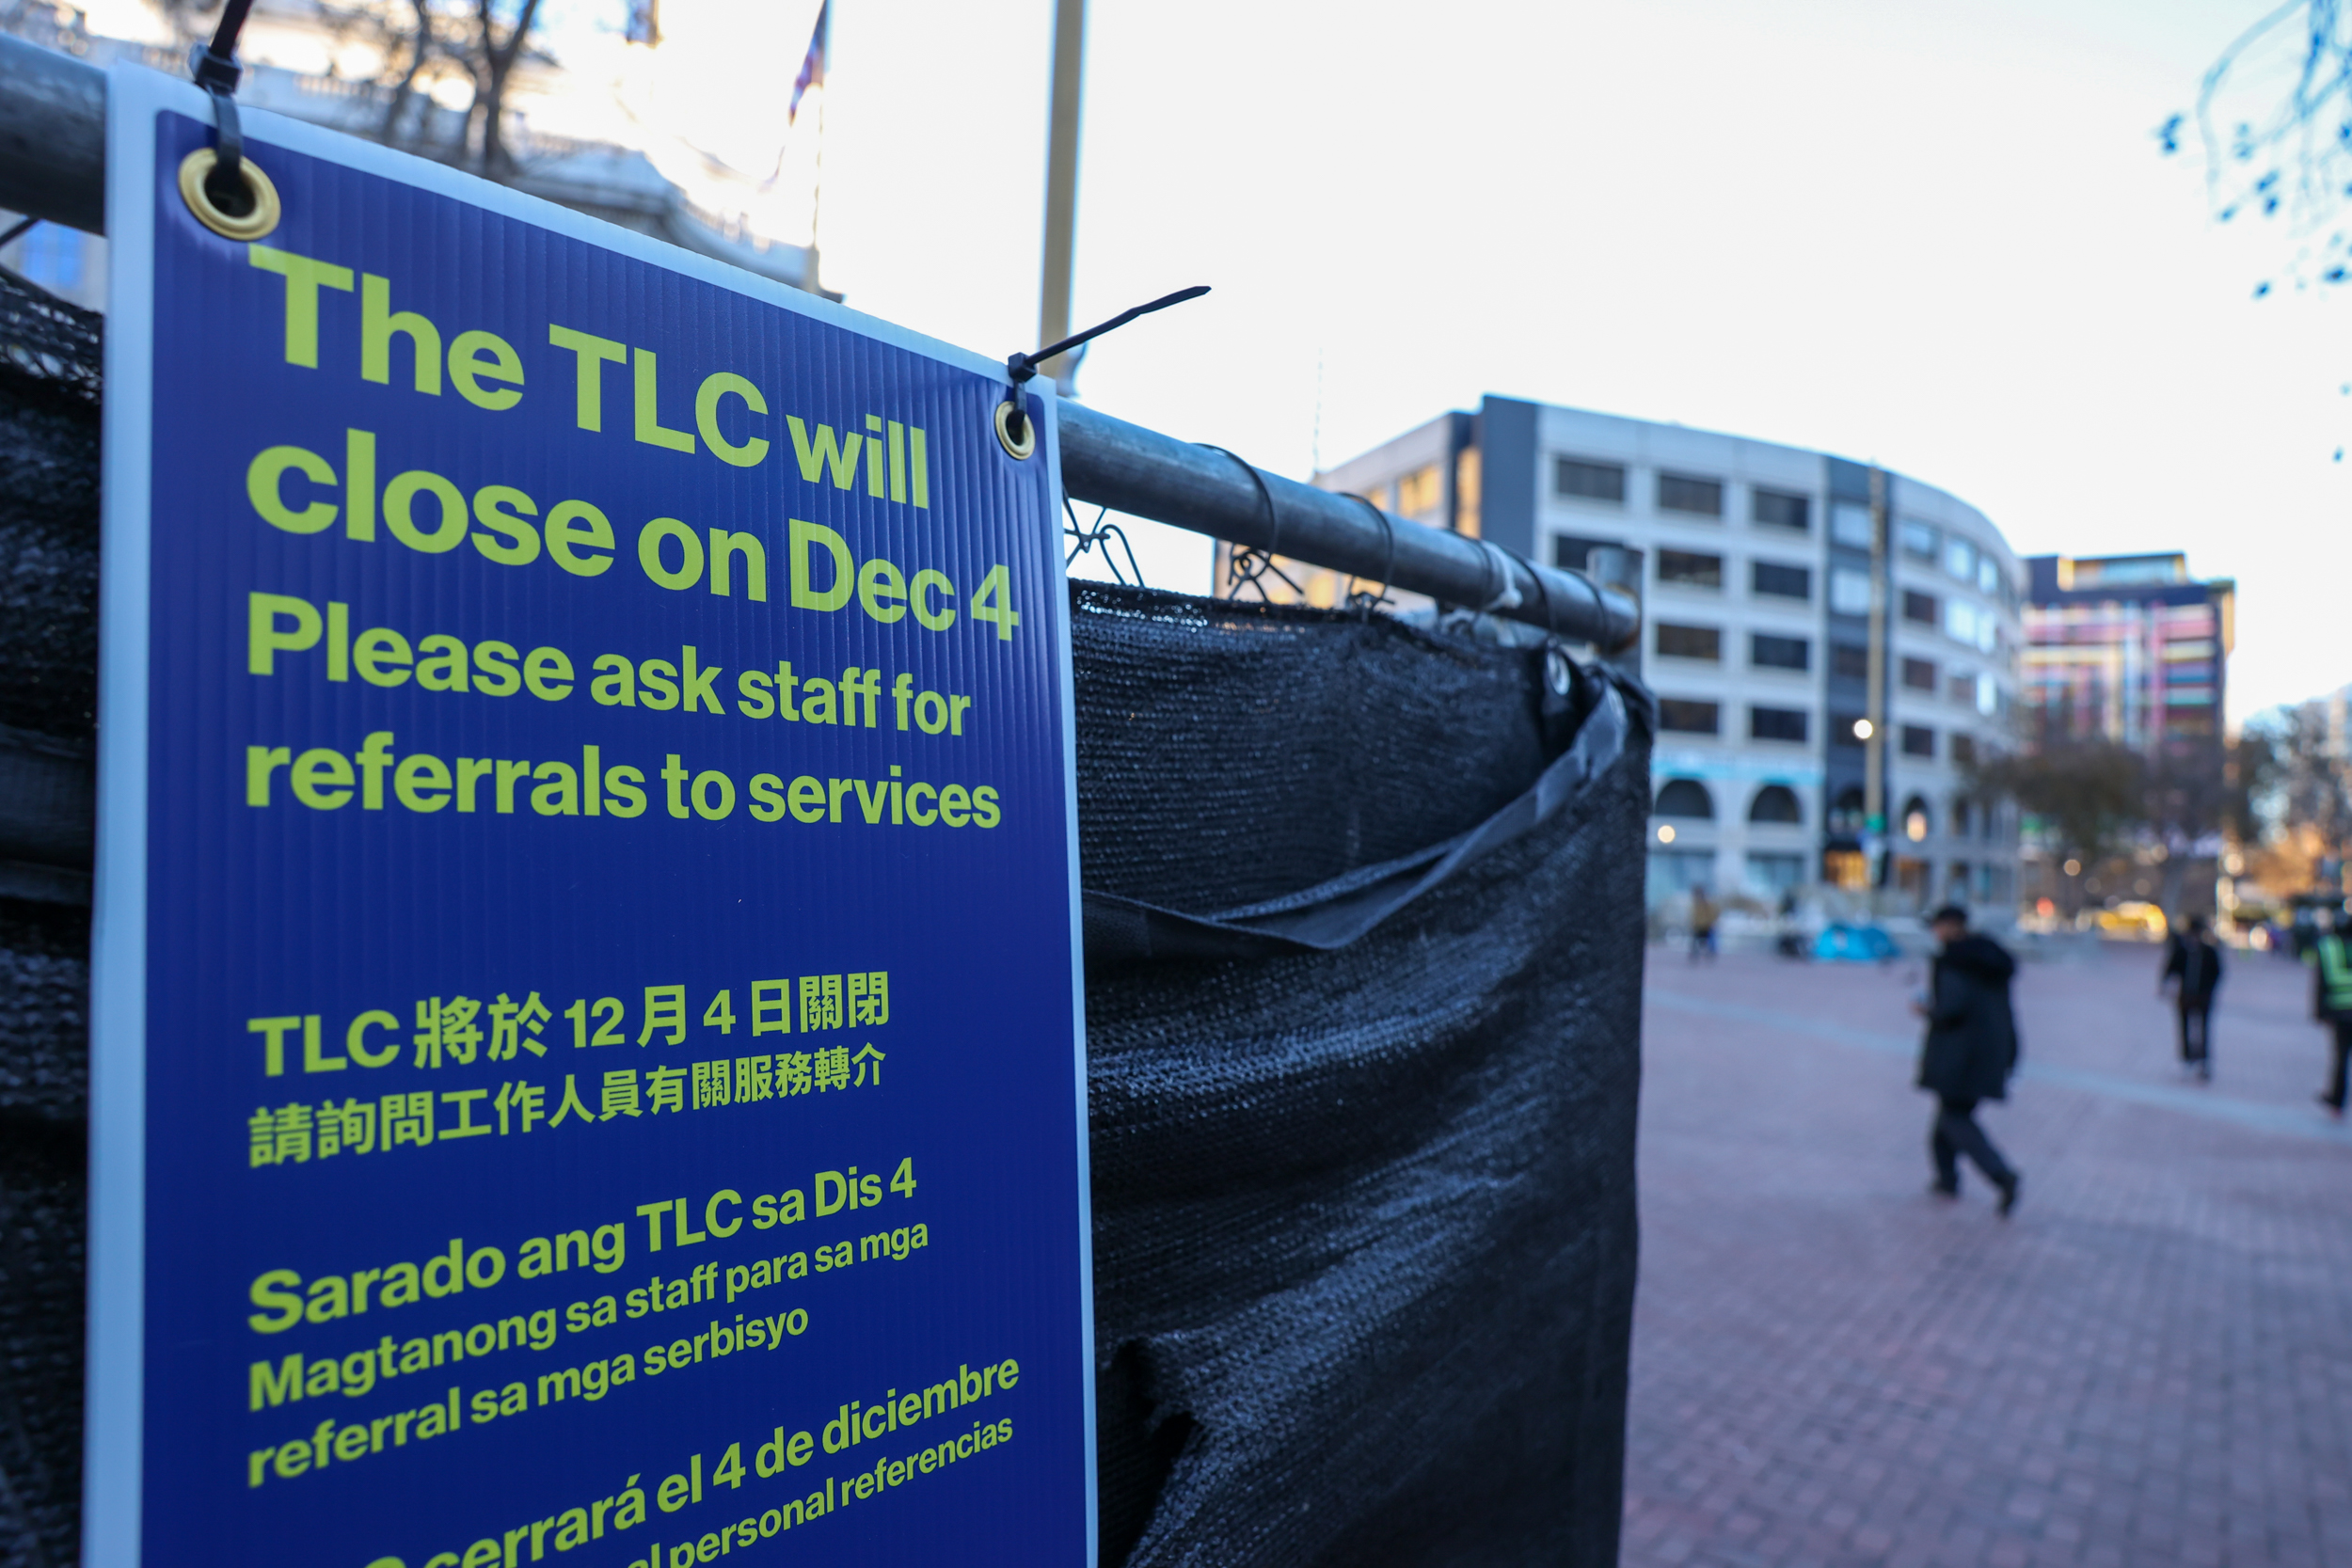 A sign stating "The TLC will close on Dec 4" in multiple languages, attached to a fence, with an urban background.